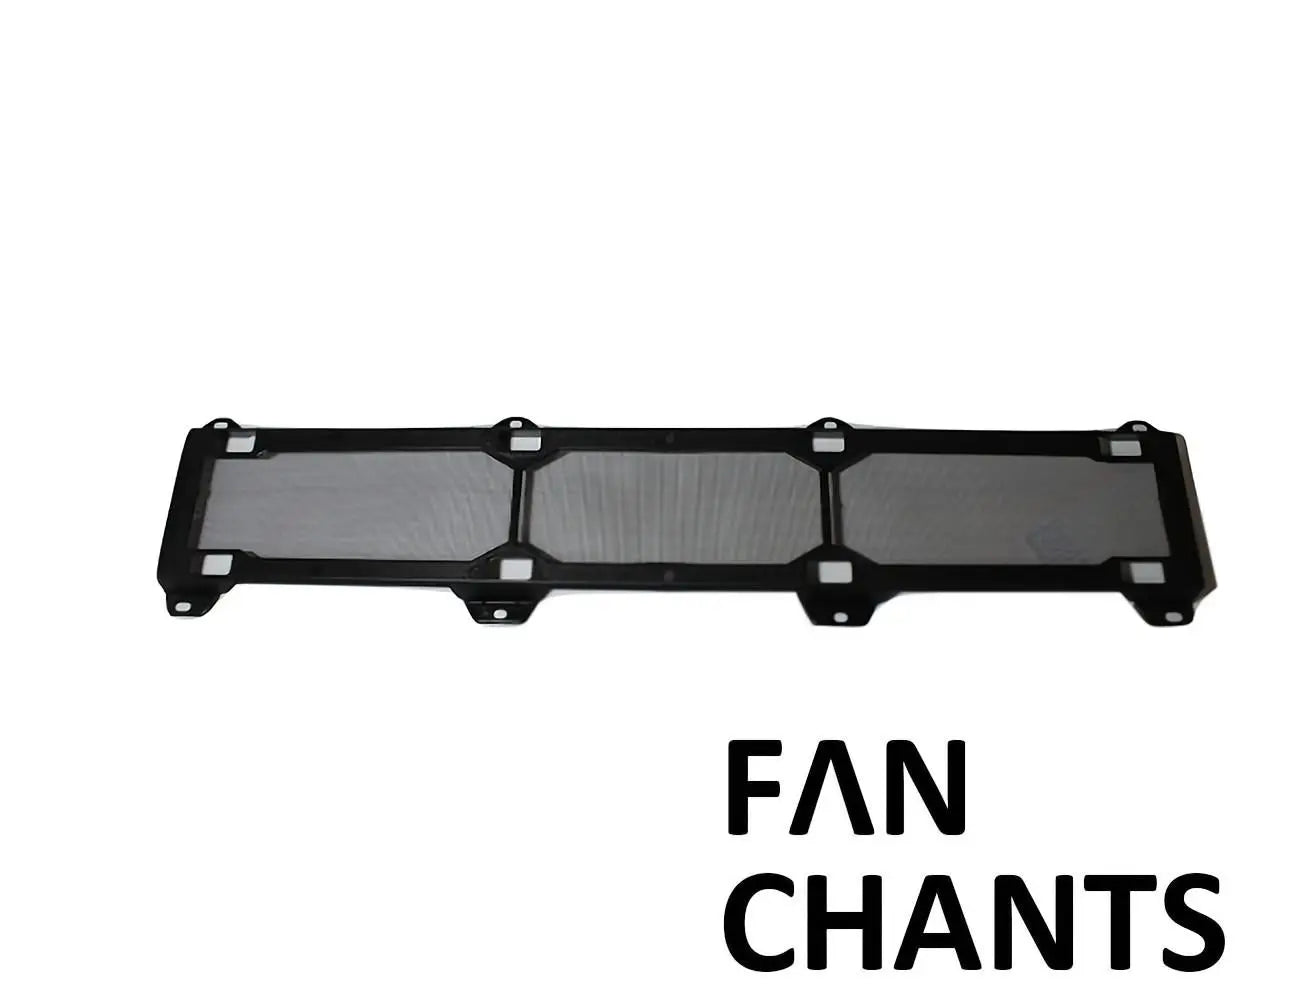 CHINA Factory Wholesale 504171180 Front grill for IVECO  Stralis 2007 FANCHANTS China Auto Parts Wholesales